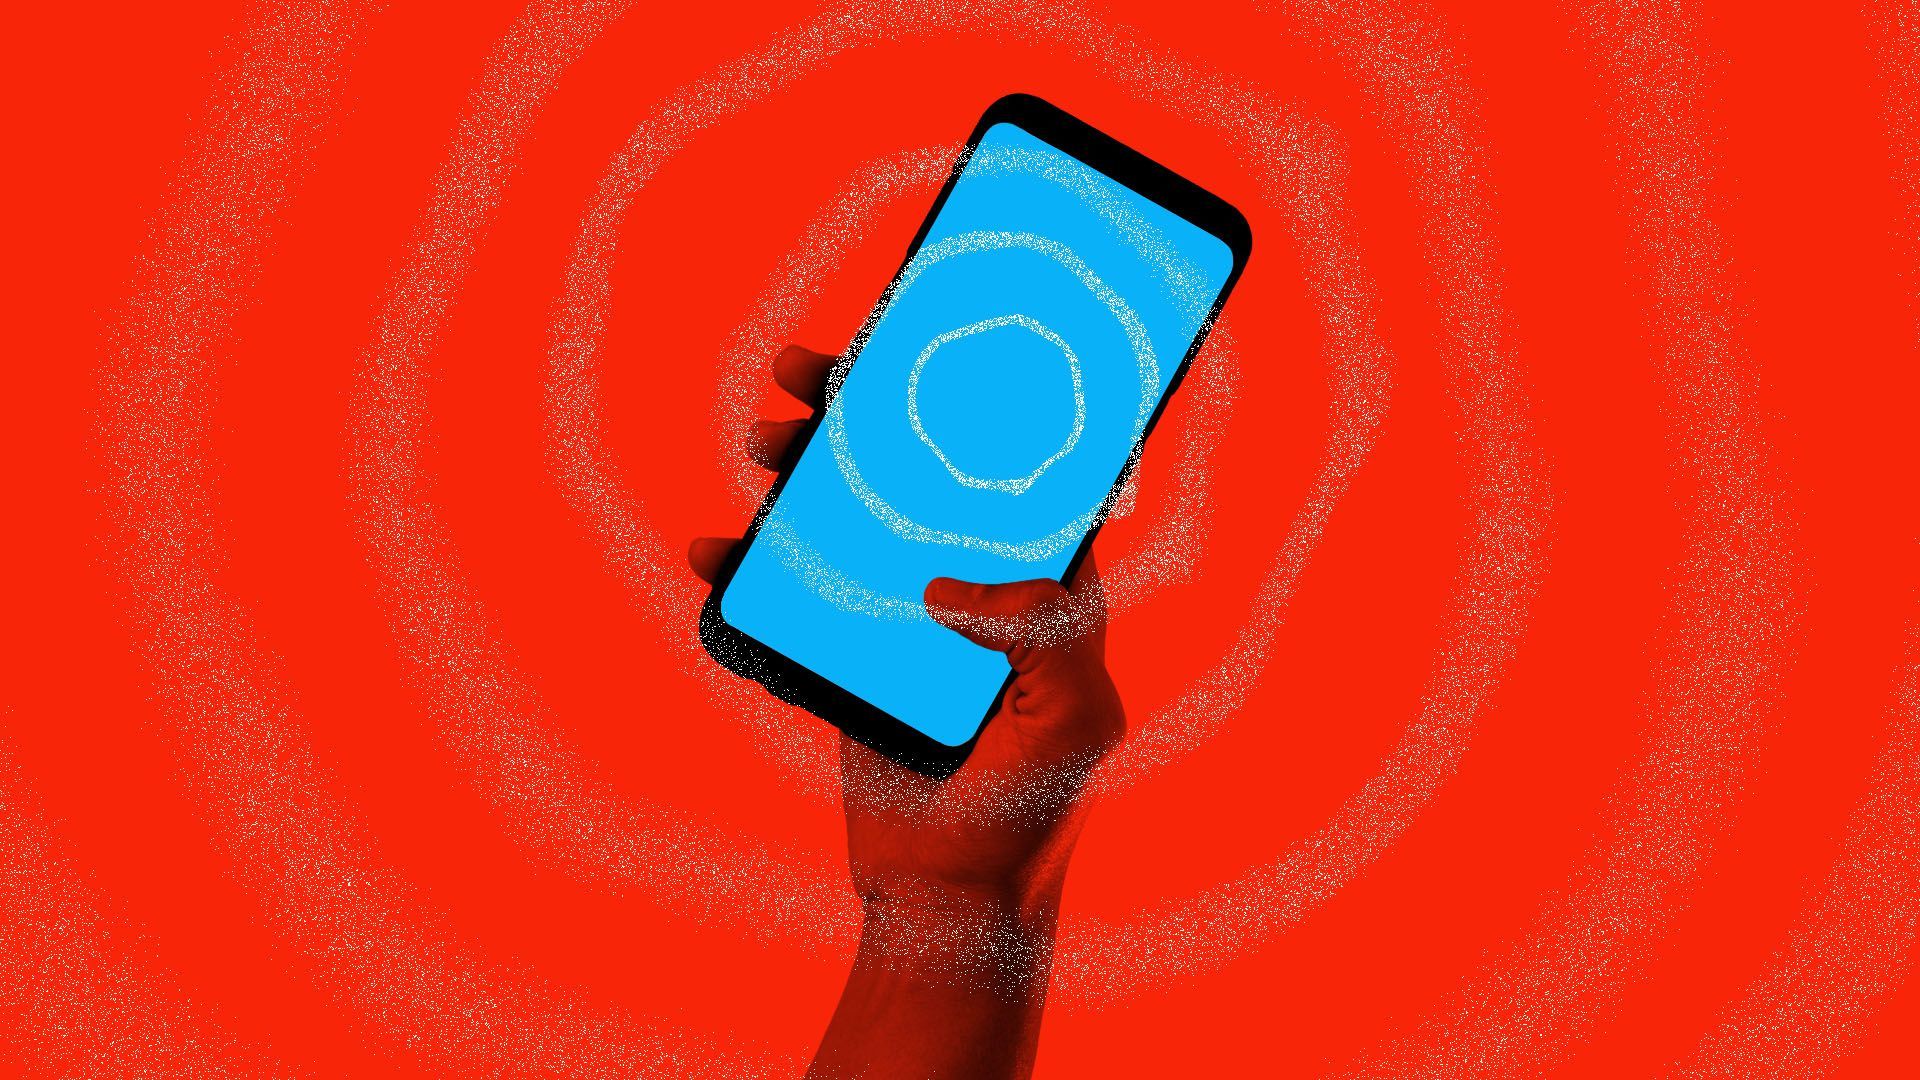 Illustration of a cellphone emanating an earthquake warning.